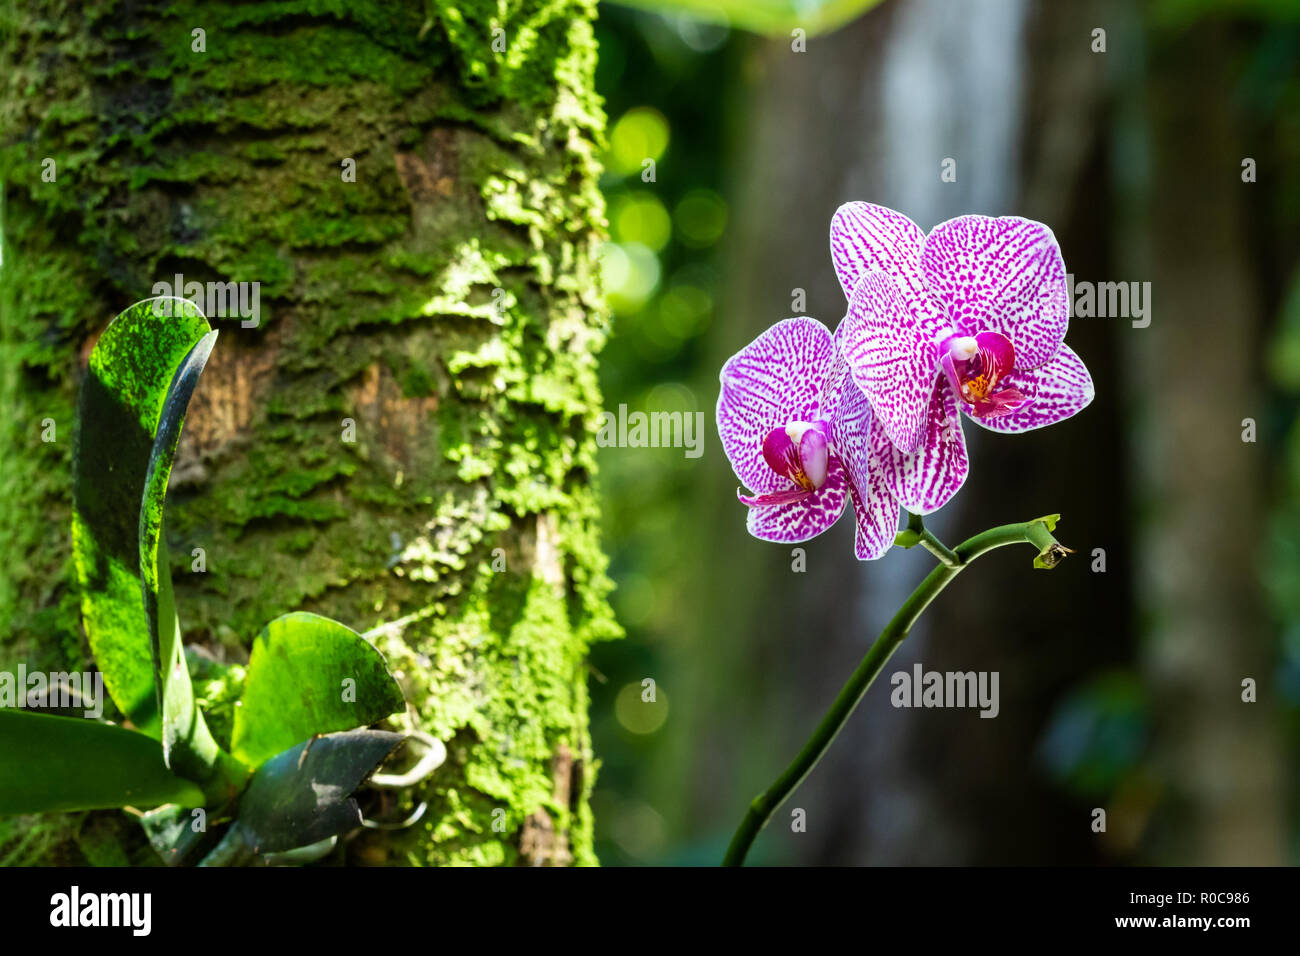 Pair of phalaenopsis (moth shaped) orchids at Botanical garden in Hilo, Hawaii. White petals speckled with pink; tree covered with moss. Stock Photo